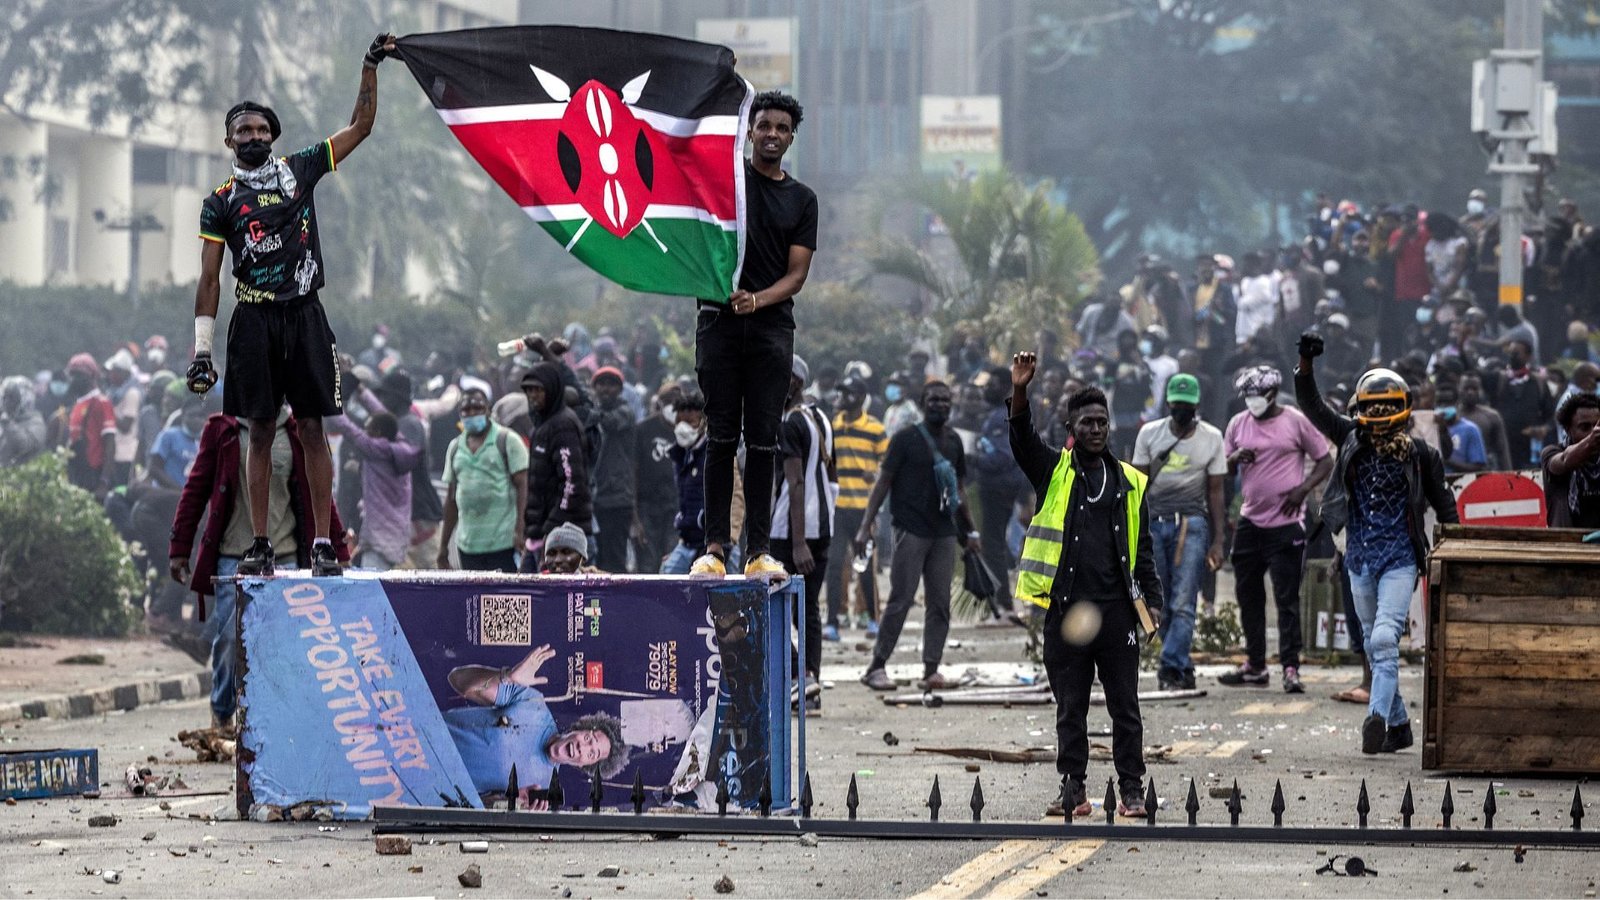 Will the unrest in Kenya escalate? | TV Shows